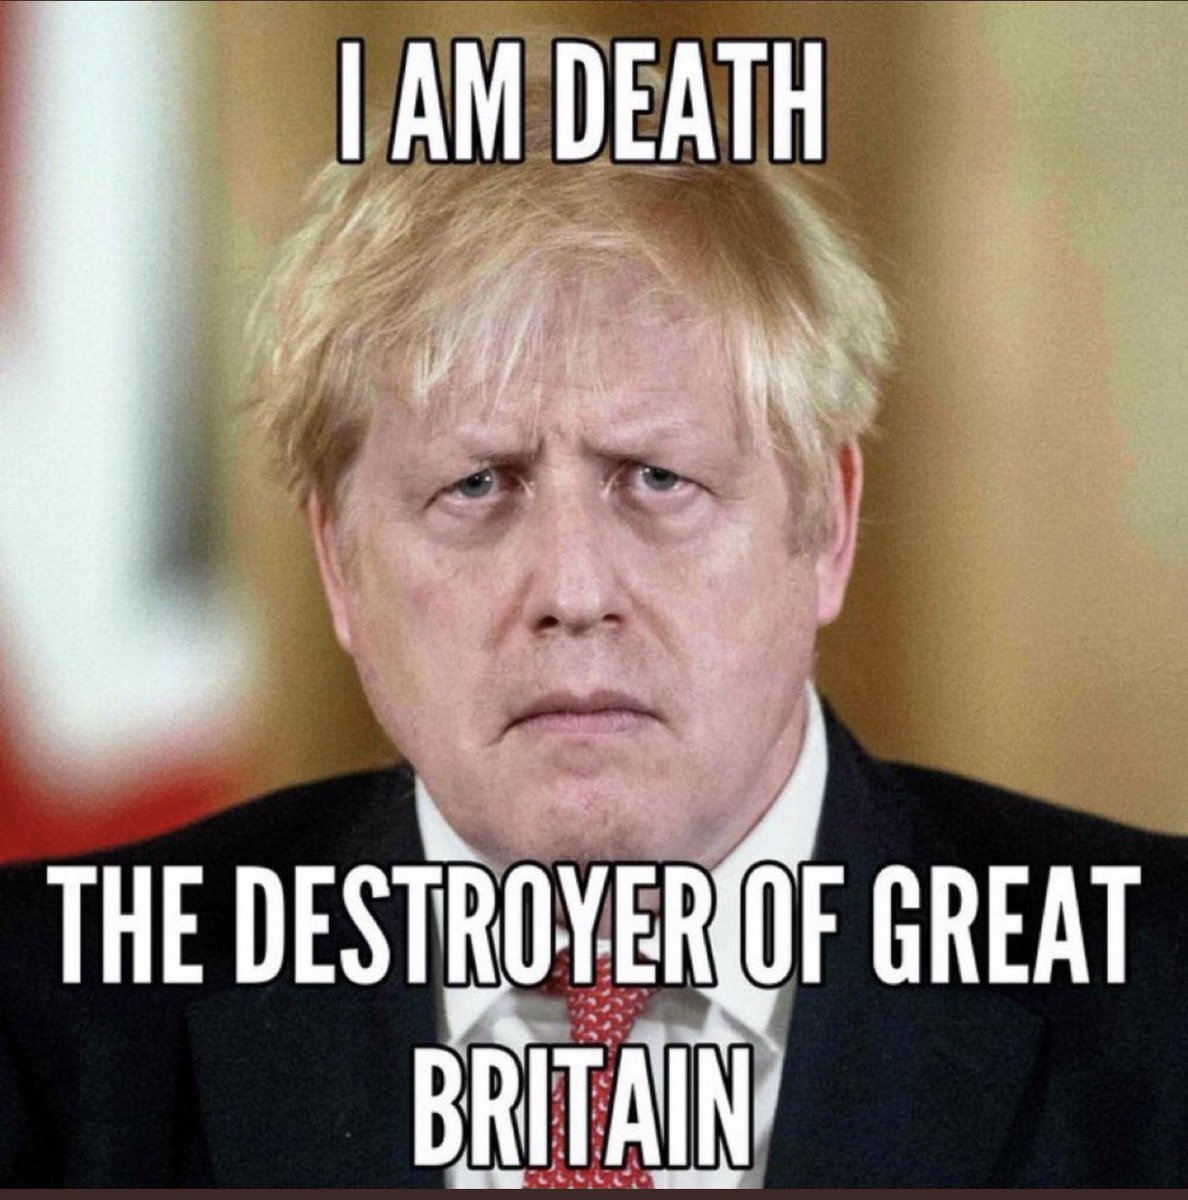 Good Sunday morning everyone, even though we’ve had 13 years of the #ToryAusterity what we must remember is the real downfall started with the #BiggestLyingGrifter of all time. We must never forgive or forget this man #ToriesLiedPeopleDied #ToriesOut249